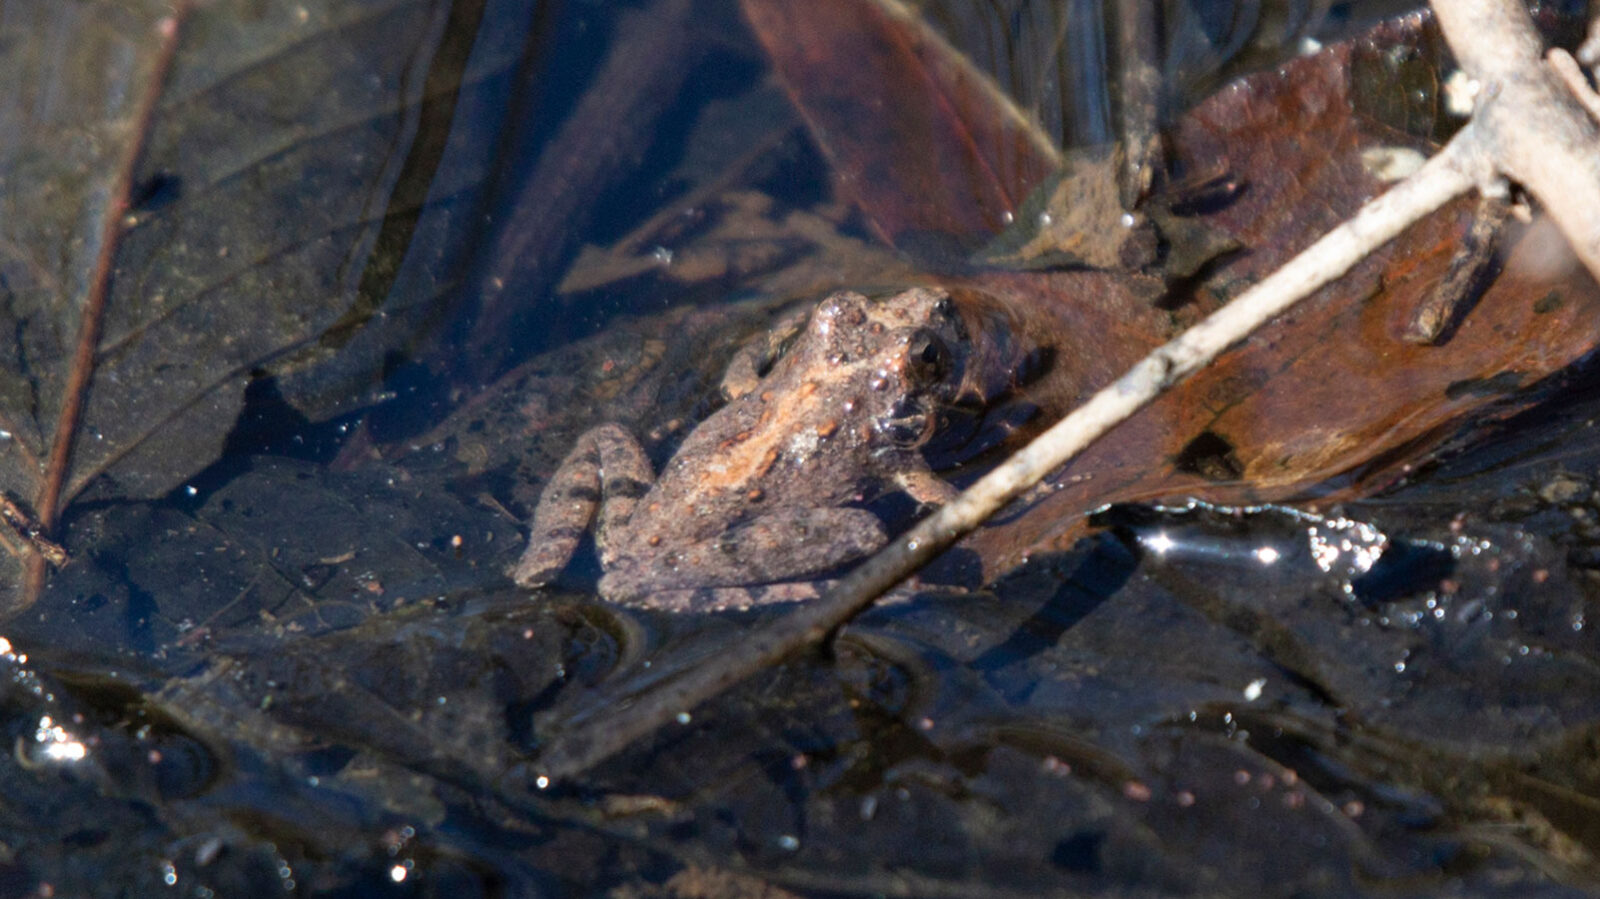 Northern cricket frog in shallow, stagnant water